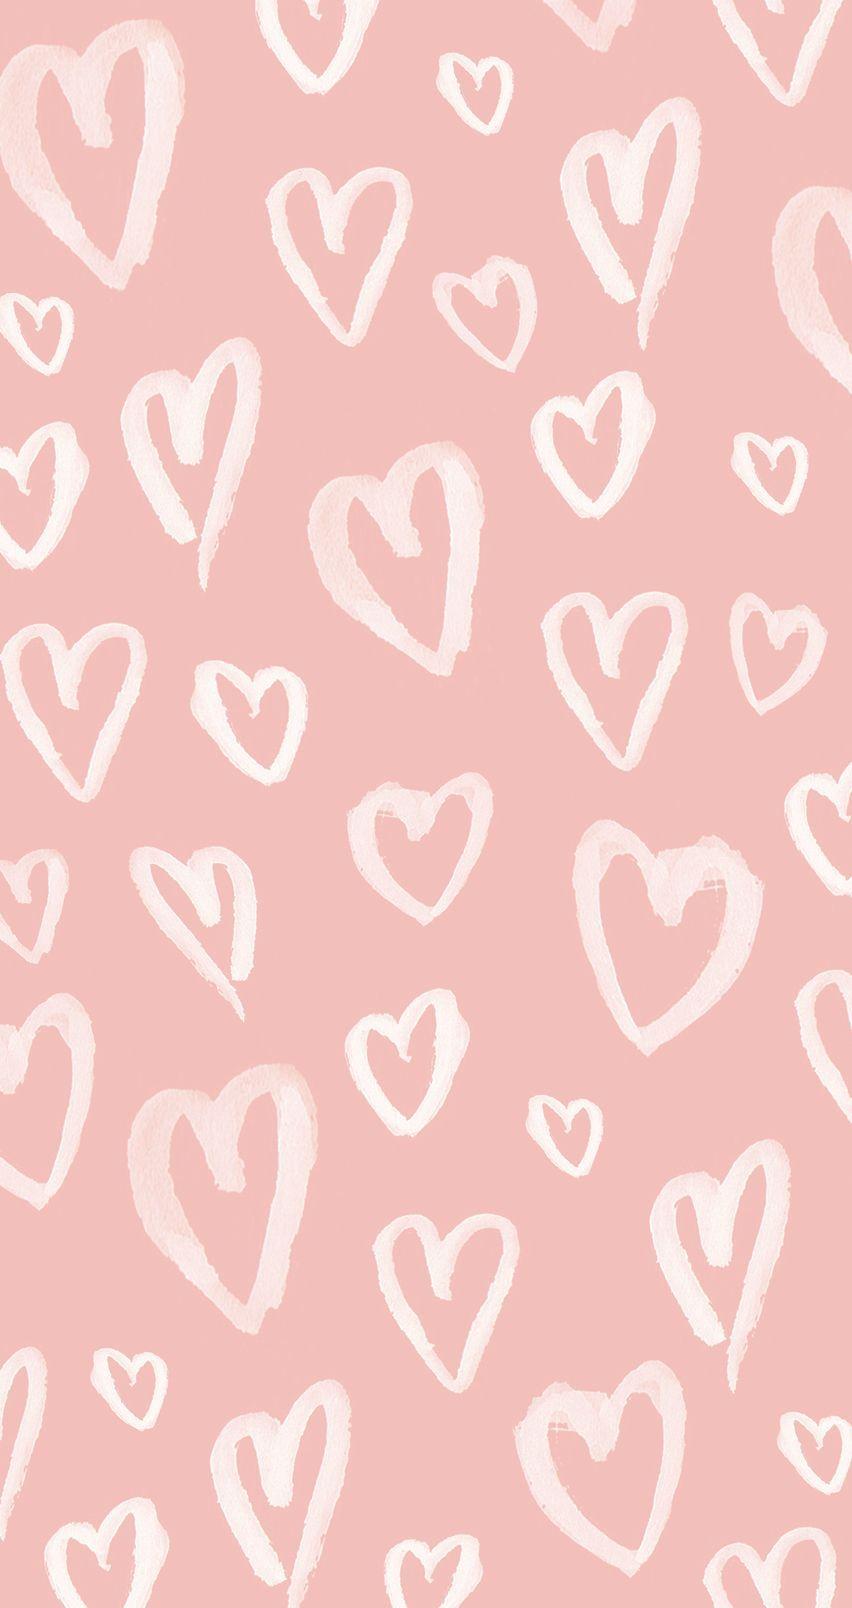 Aesthetic Valentines Day Wallpapers Wallpaper Cave 1iphone5wallpaper.com is your first and best source for all of the information you're looking for. aesthetic valentines day wallpapers